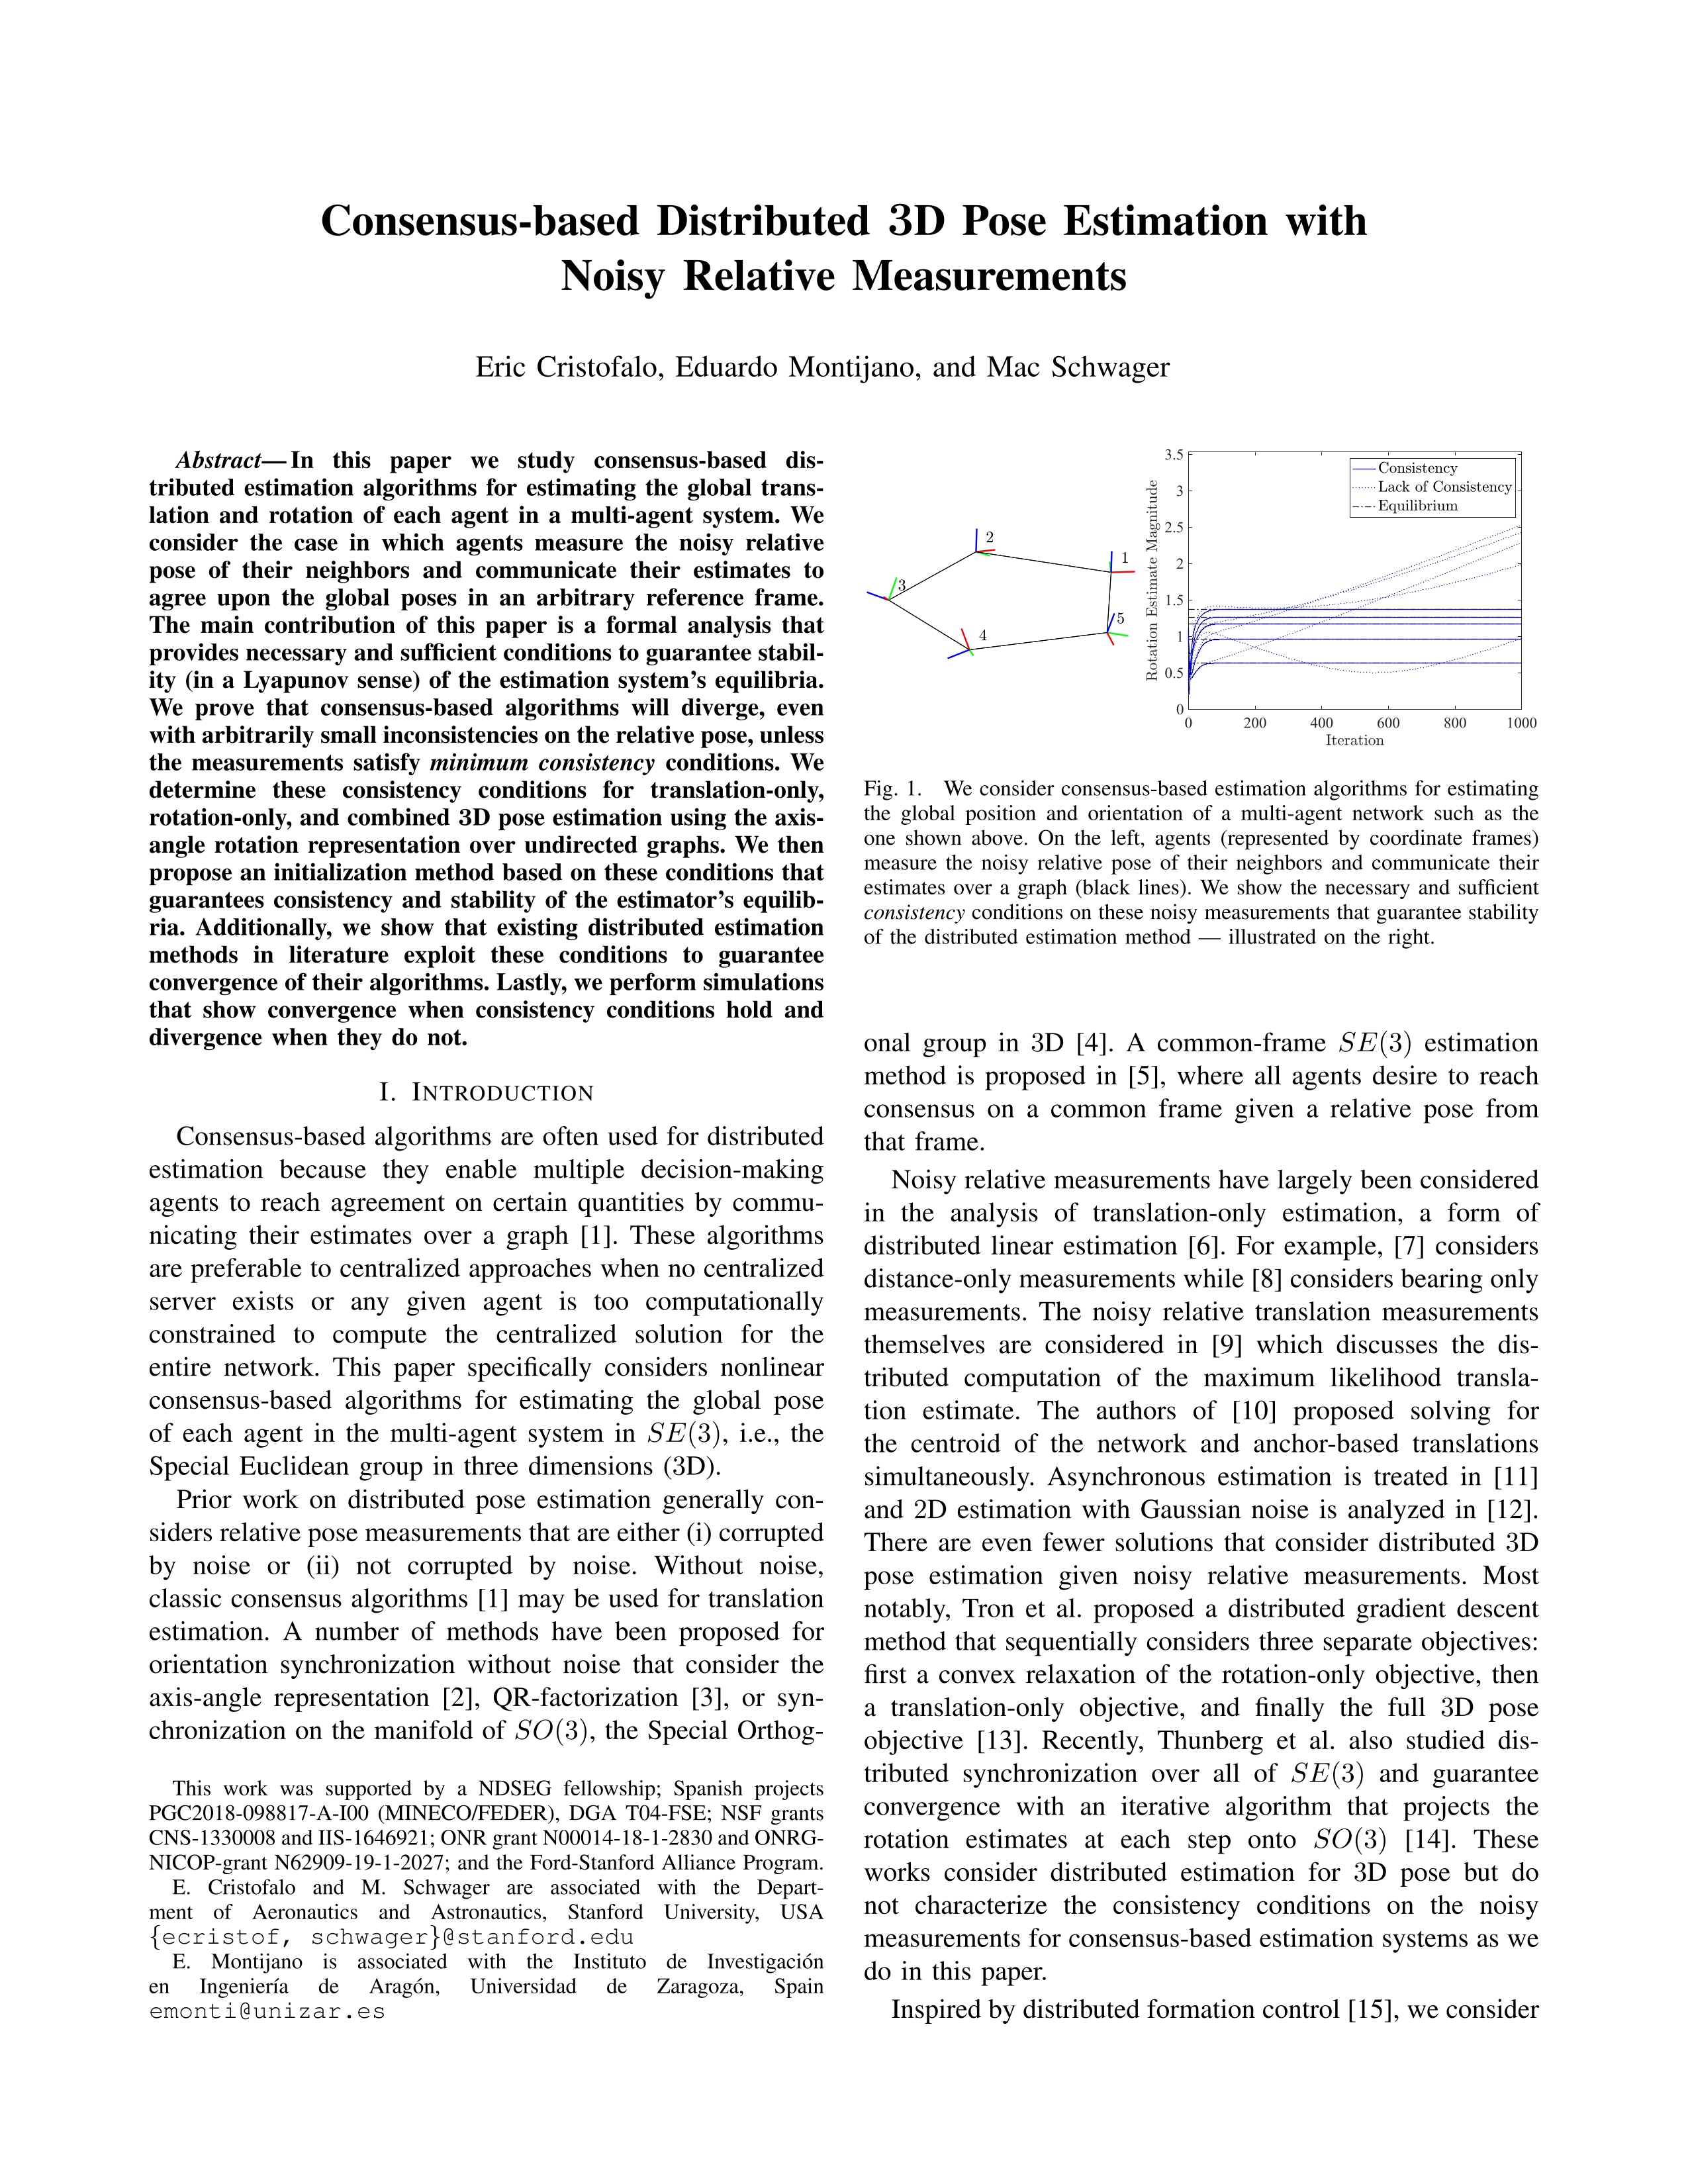 Consensus Based Distributed 3d Pose Estimation With Noisy Relative Measurements